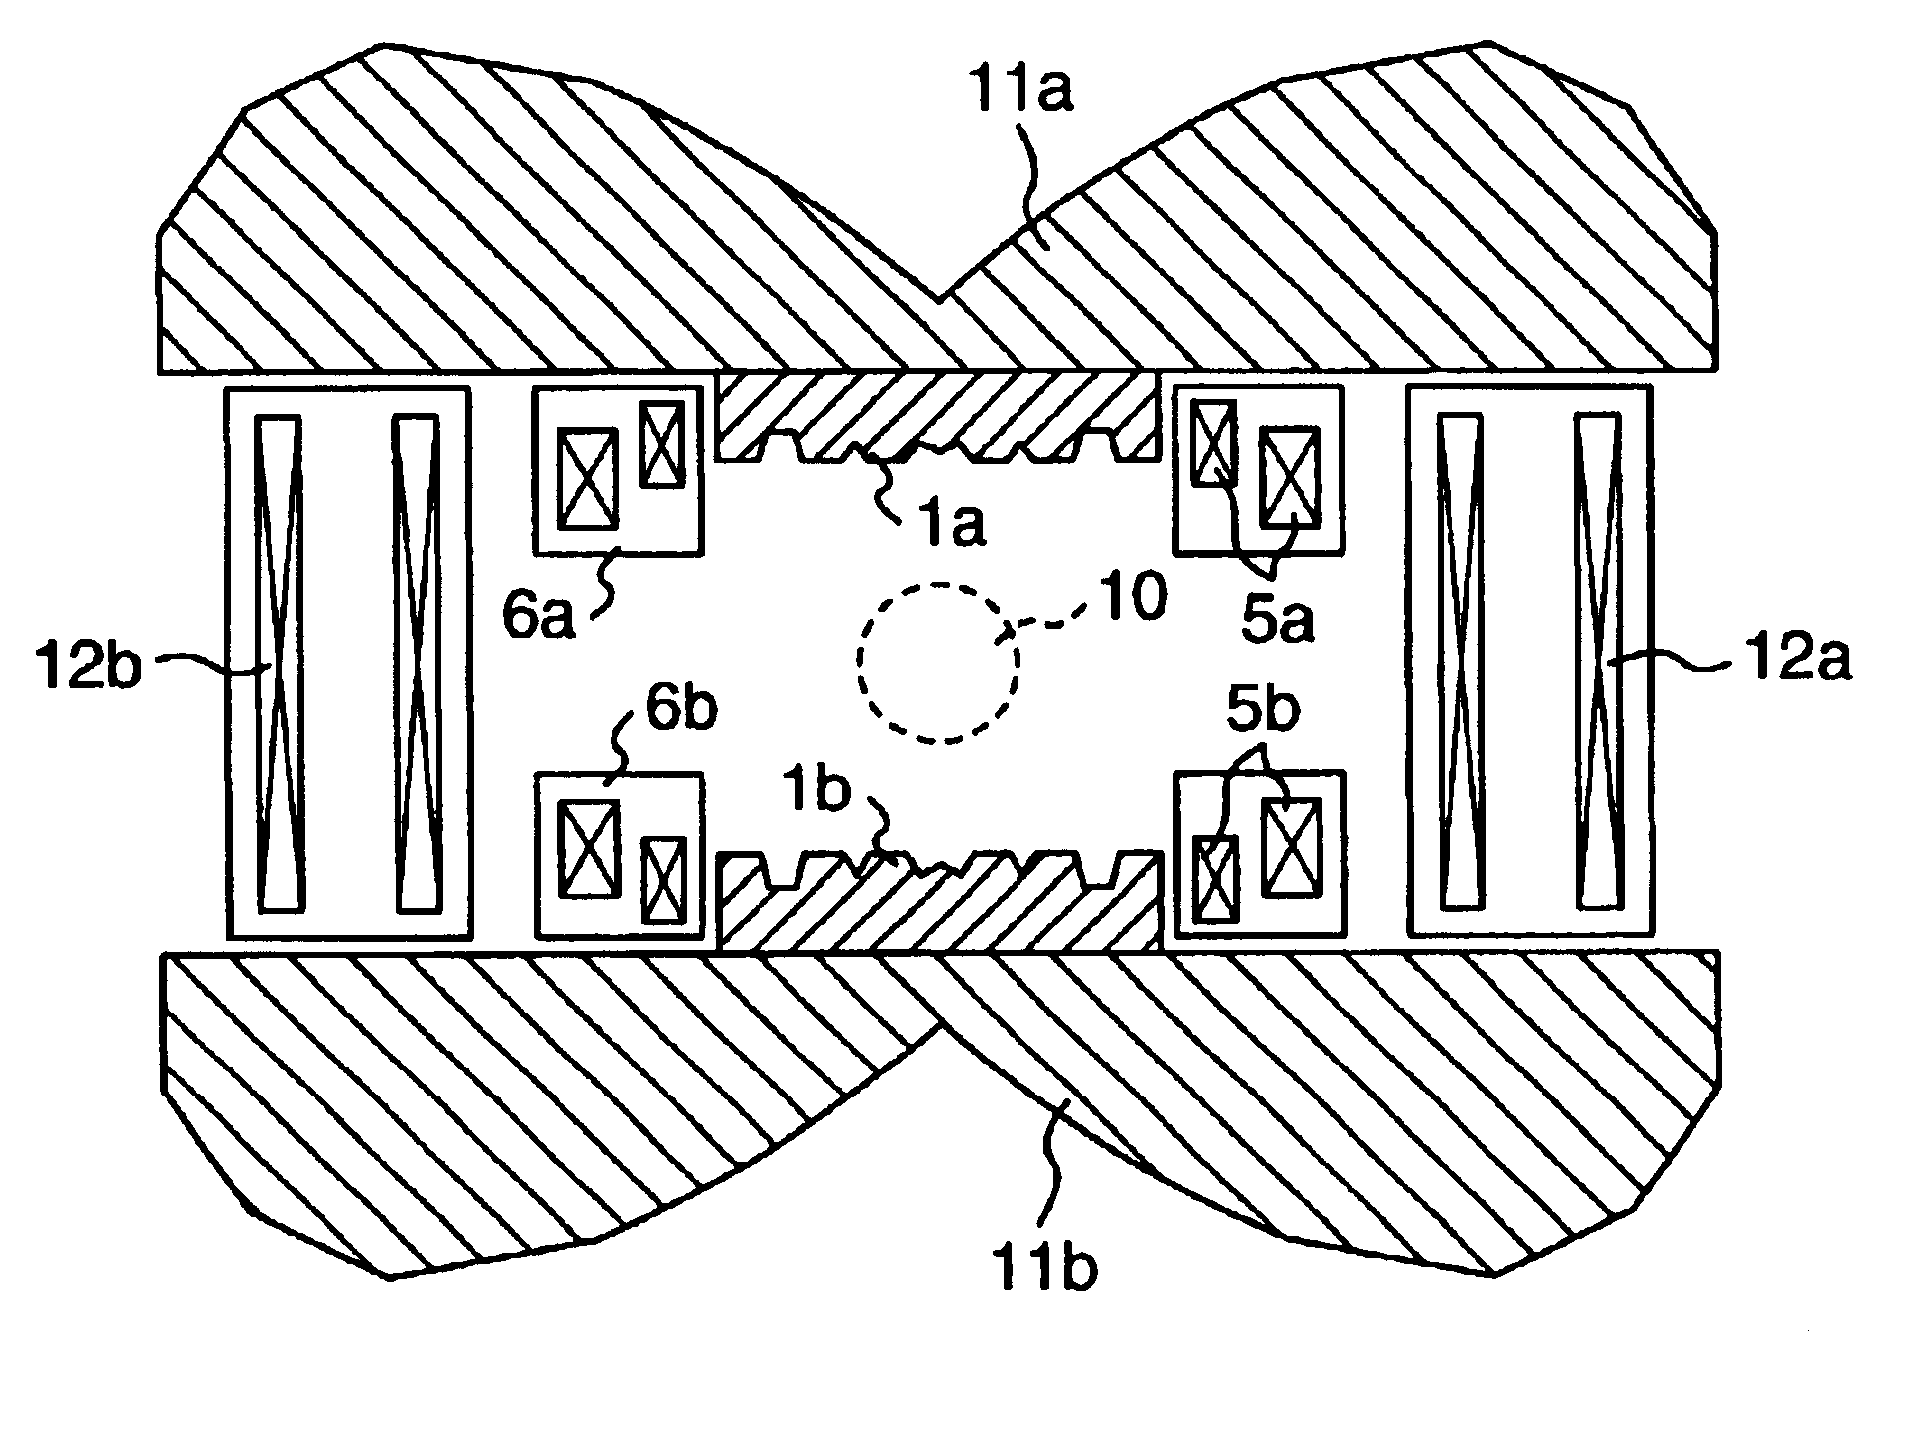 Magnet for magnetic resonance imaging apparatus